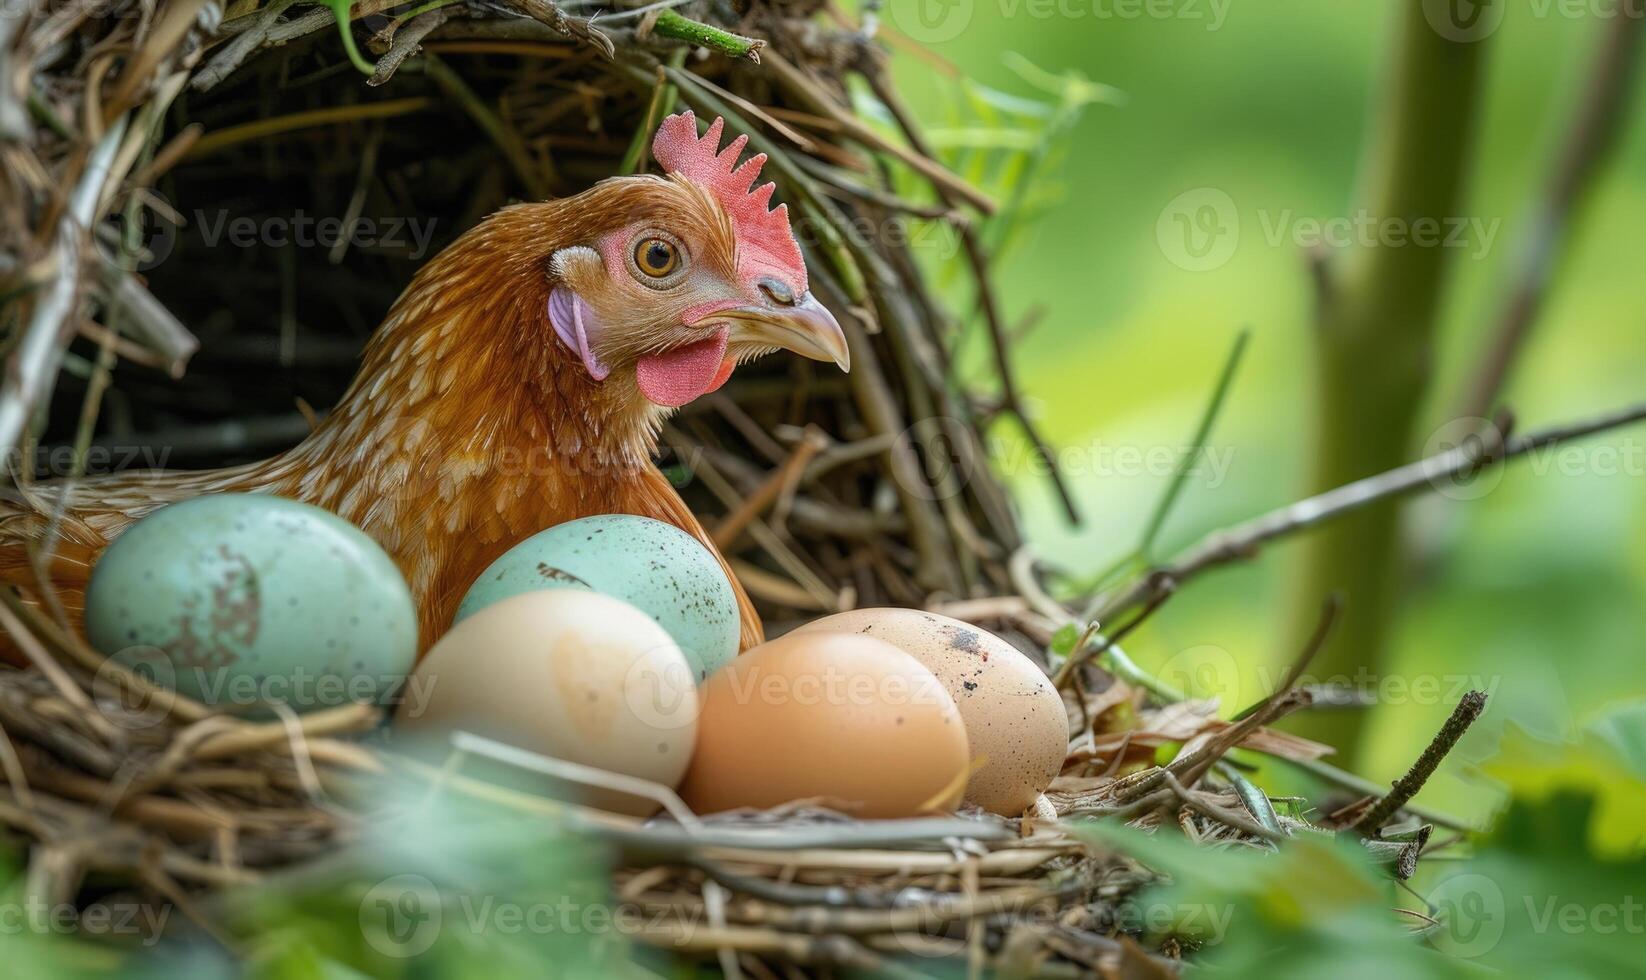 A hen guarding her freshly laid eggs in a nest photo